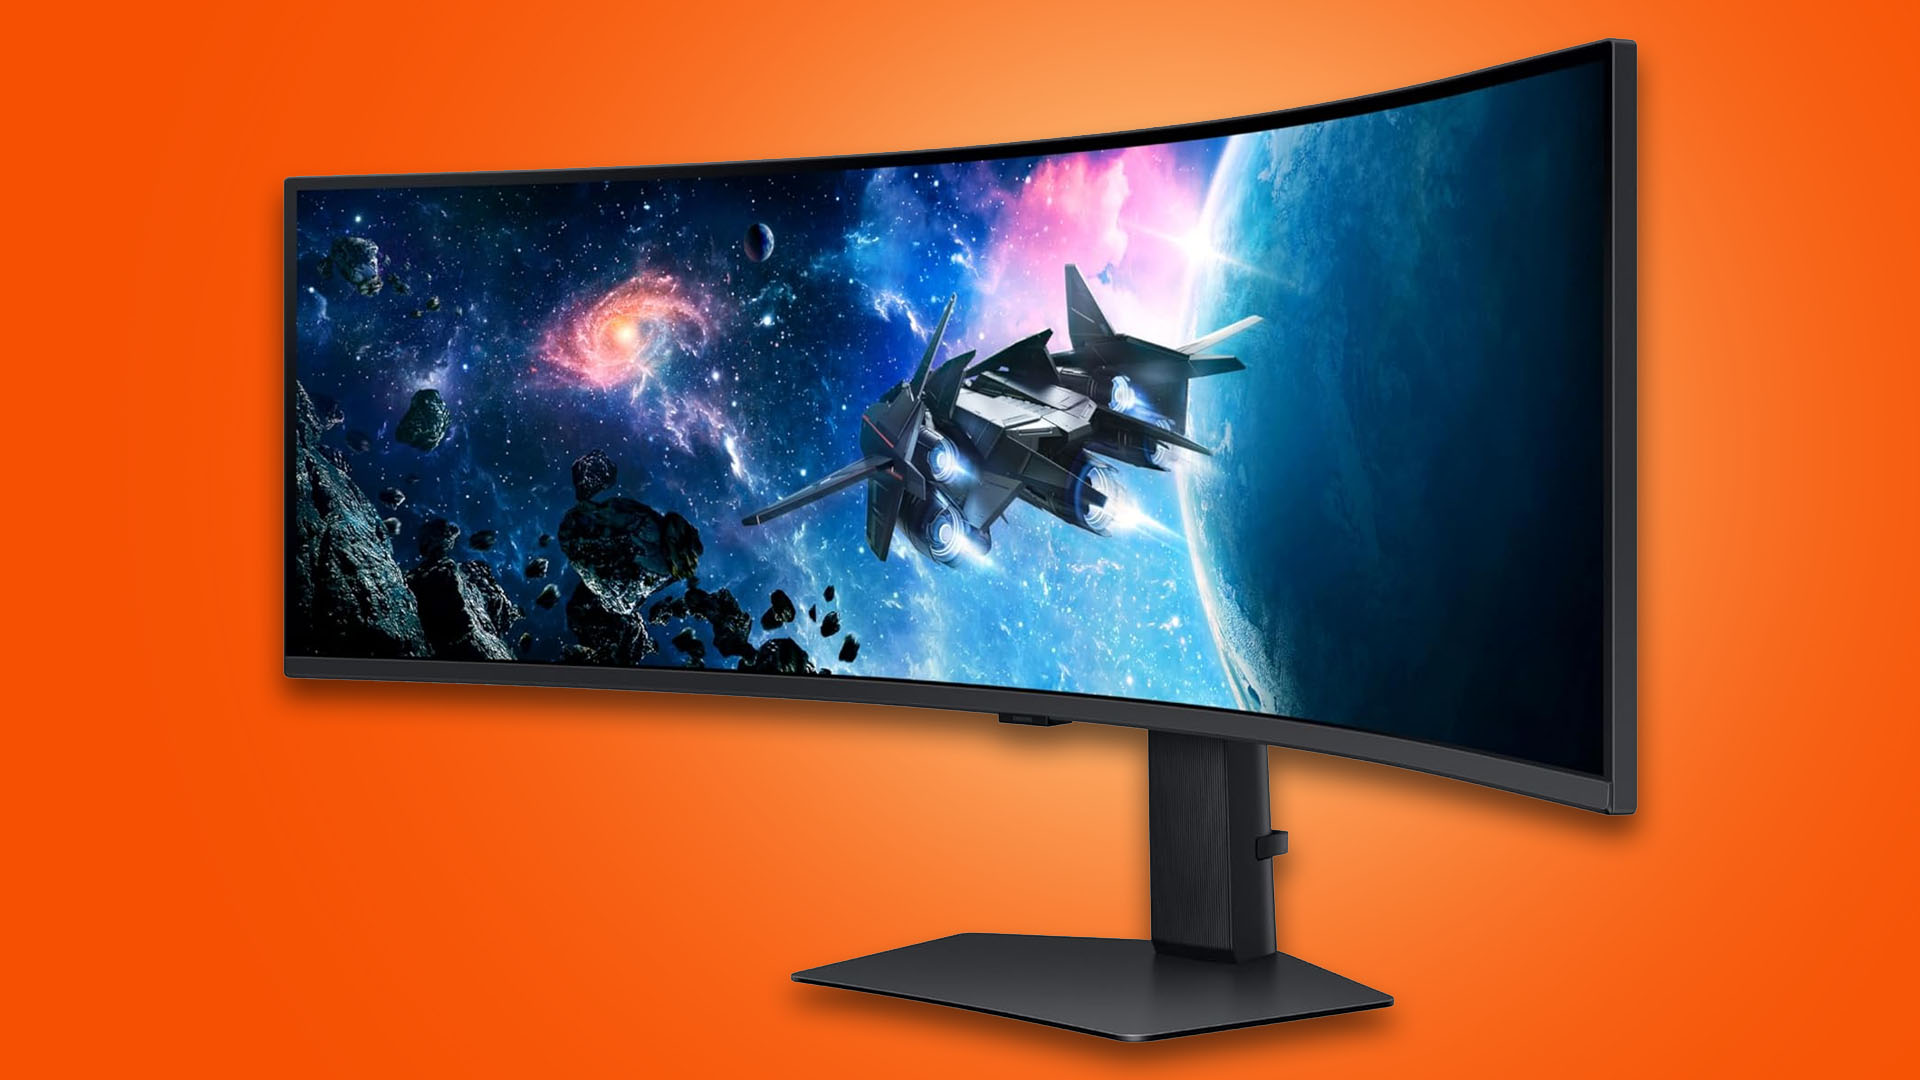 Save $200 on this massive 49-inch, 240Hz Samsung gaming monitor